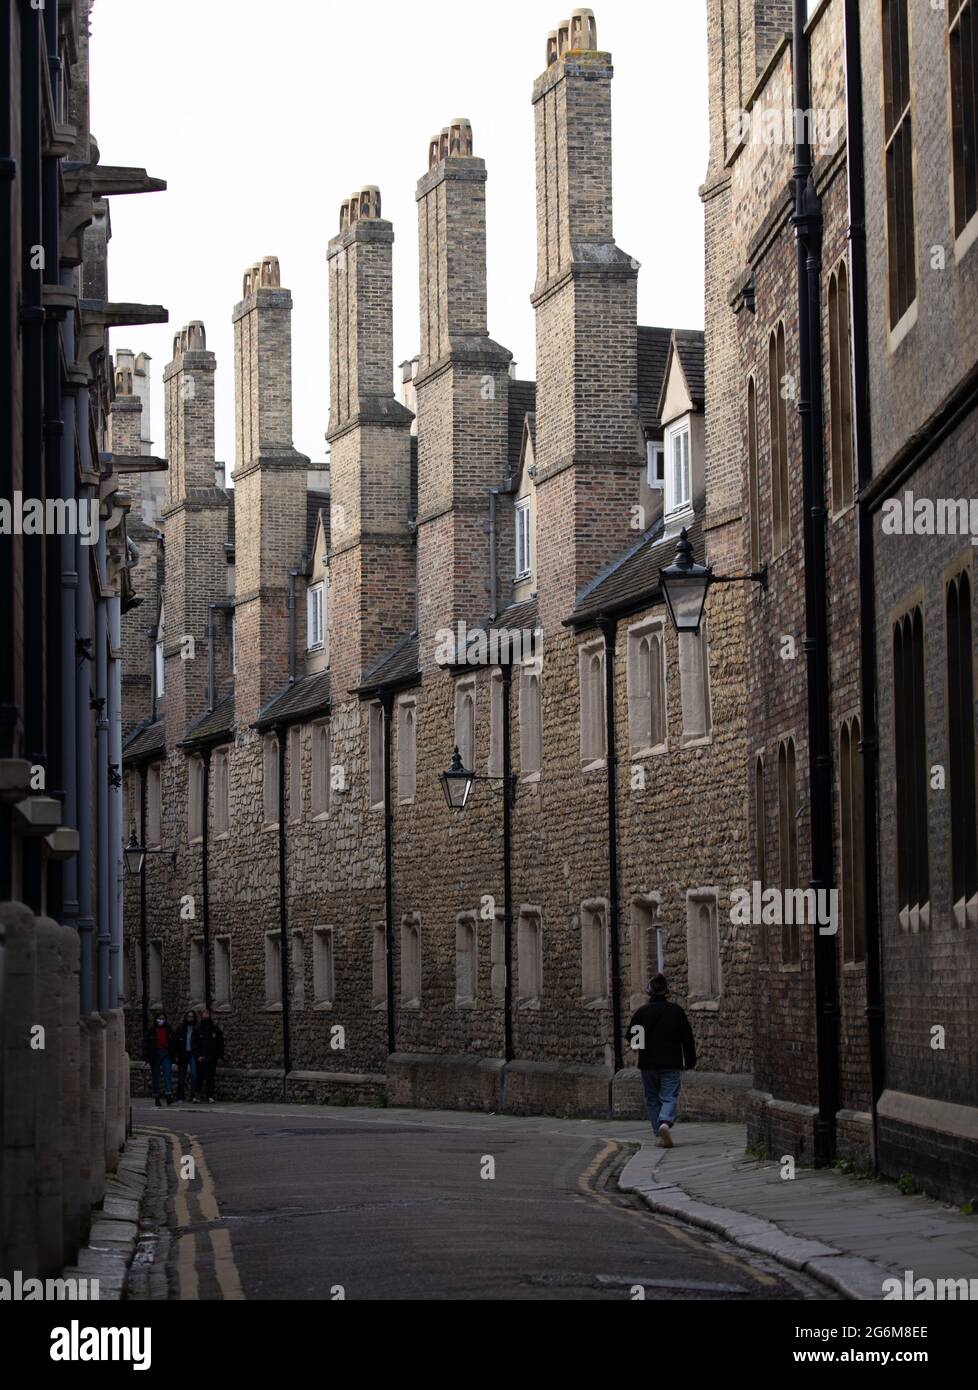 One person walking along the narrow lane lined old buildings with with tall Trinity college chimneys in Trinity Lane Cambridge England Stock Photo